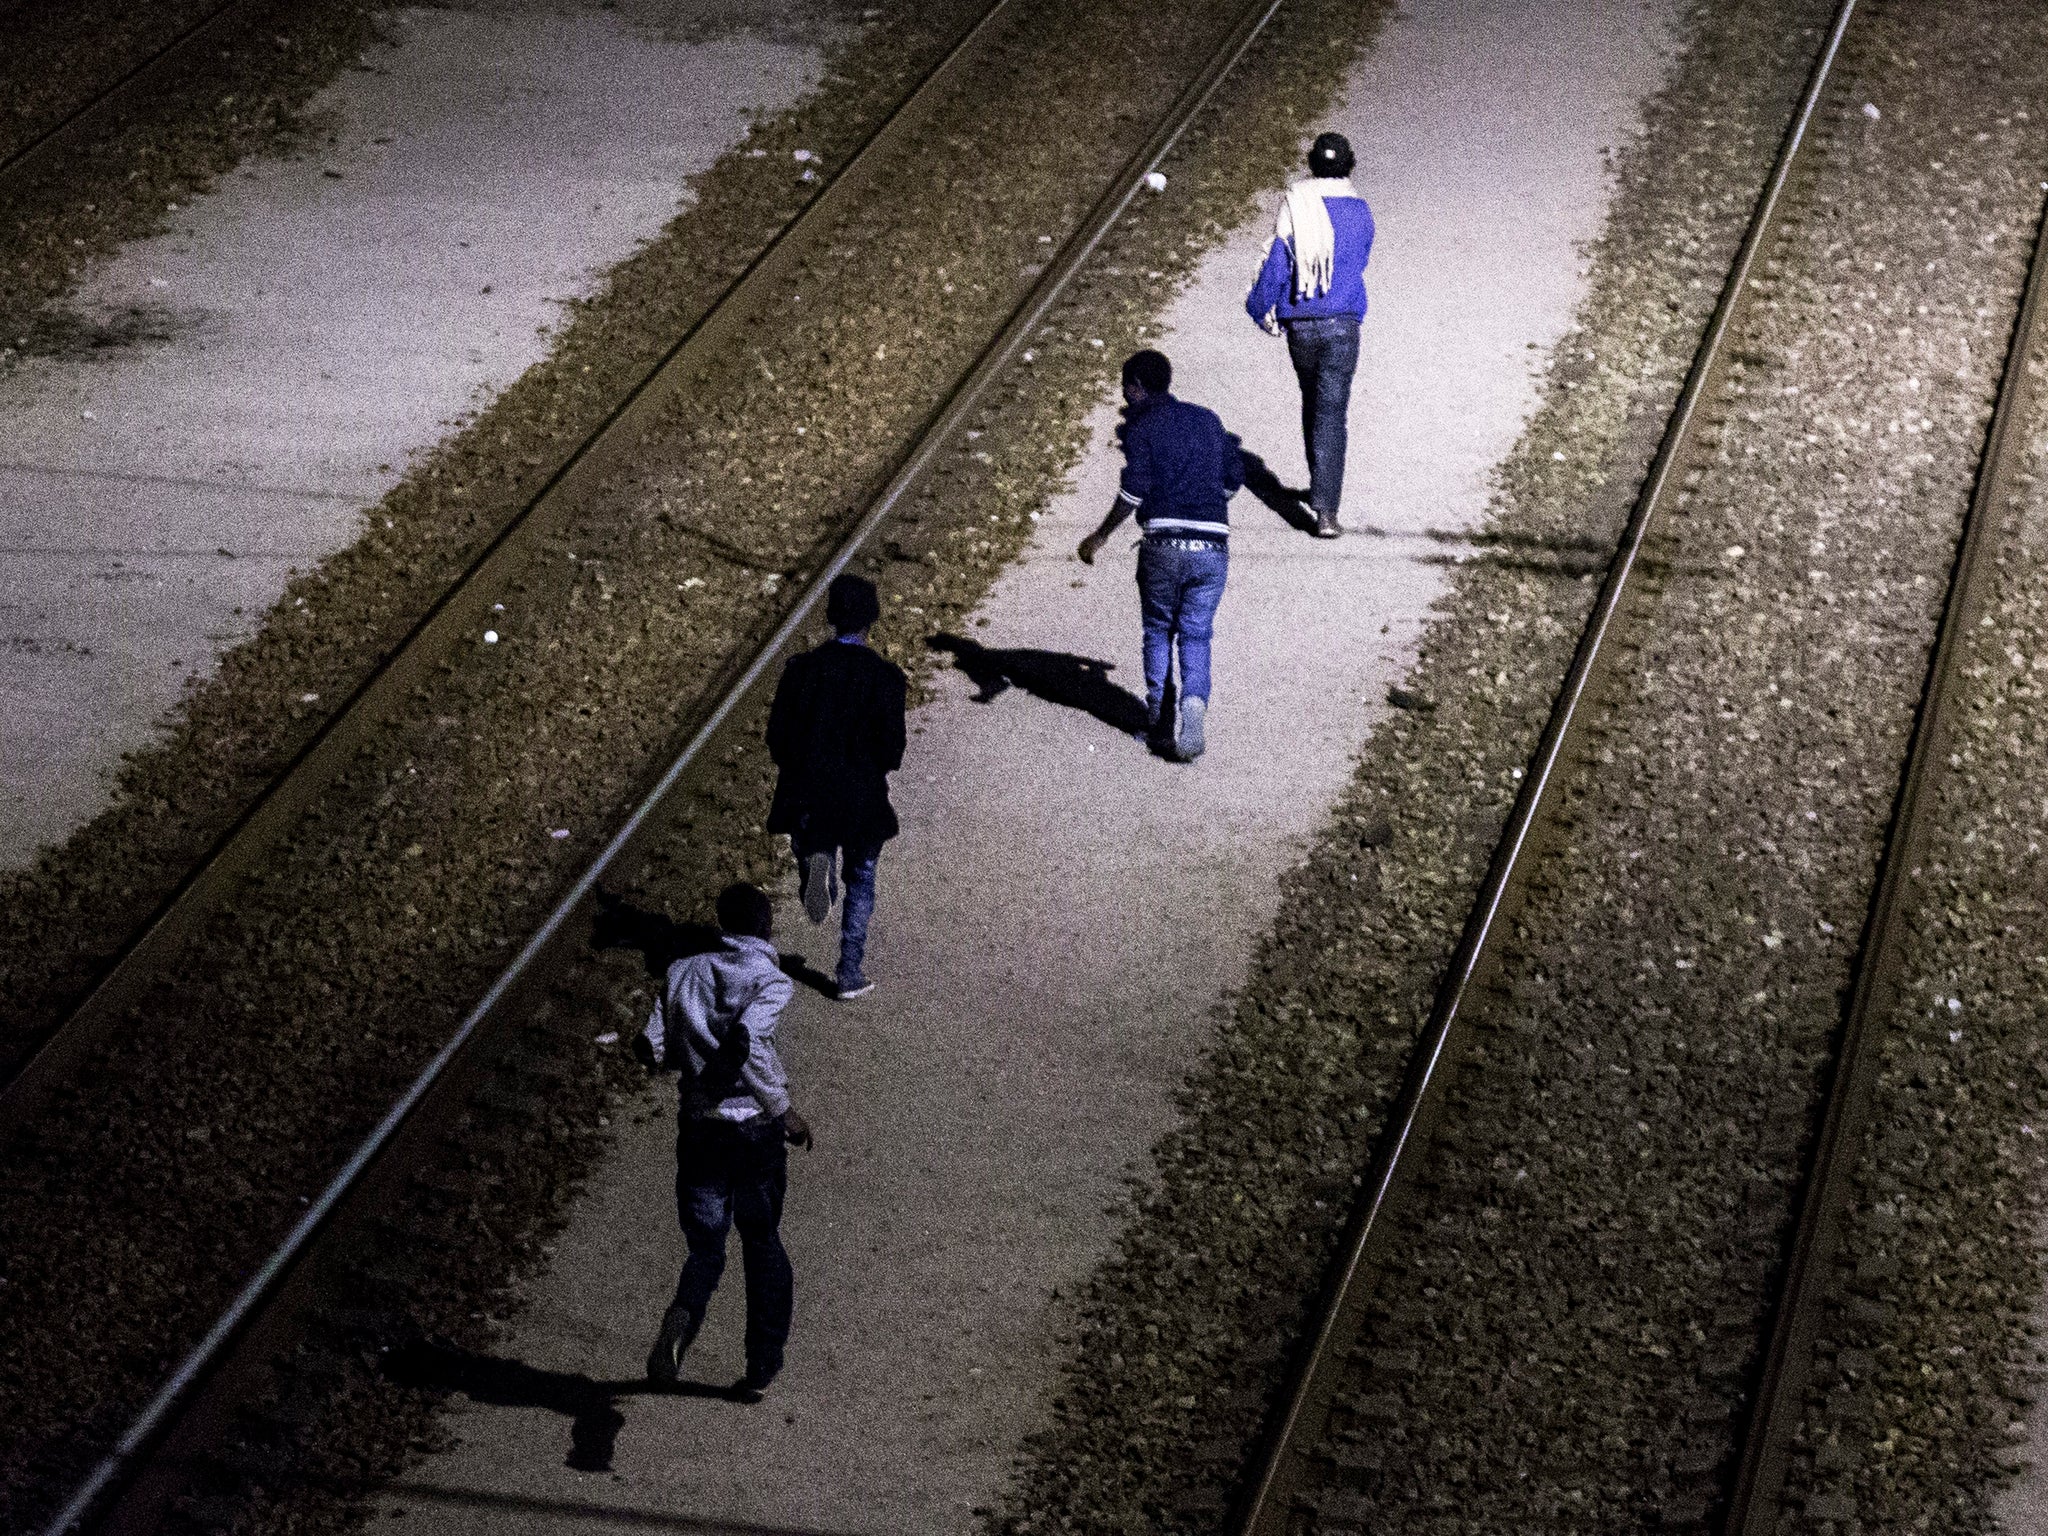 Migrants run on the shuttle tracks after they succeeded to jump over the fences and avoid the French patrols on the outskirts of Calais.